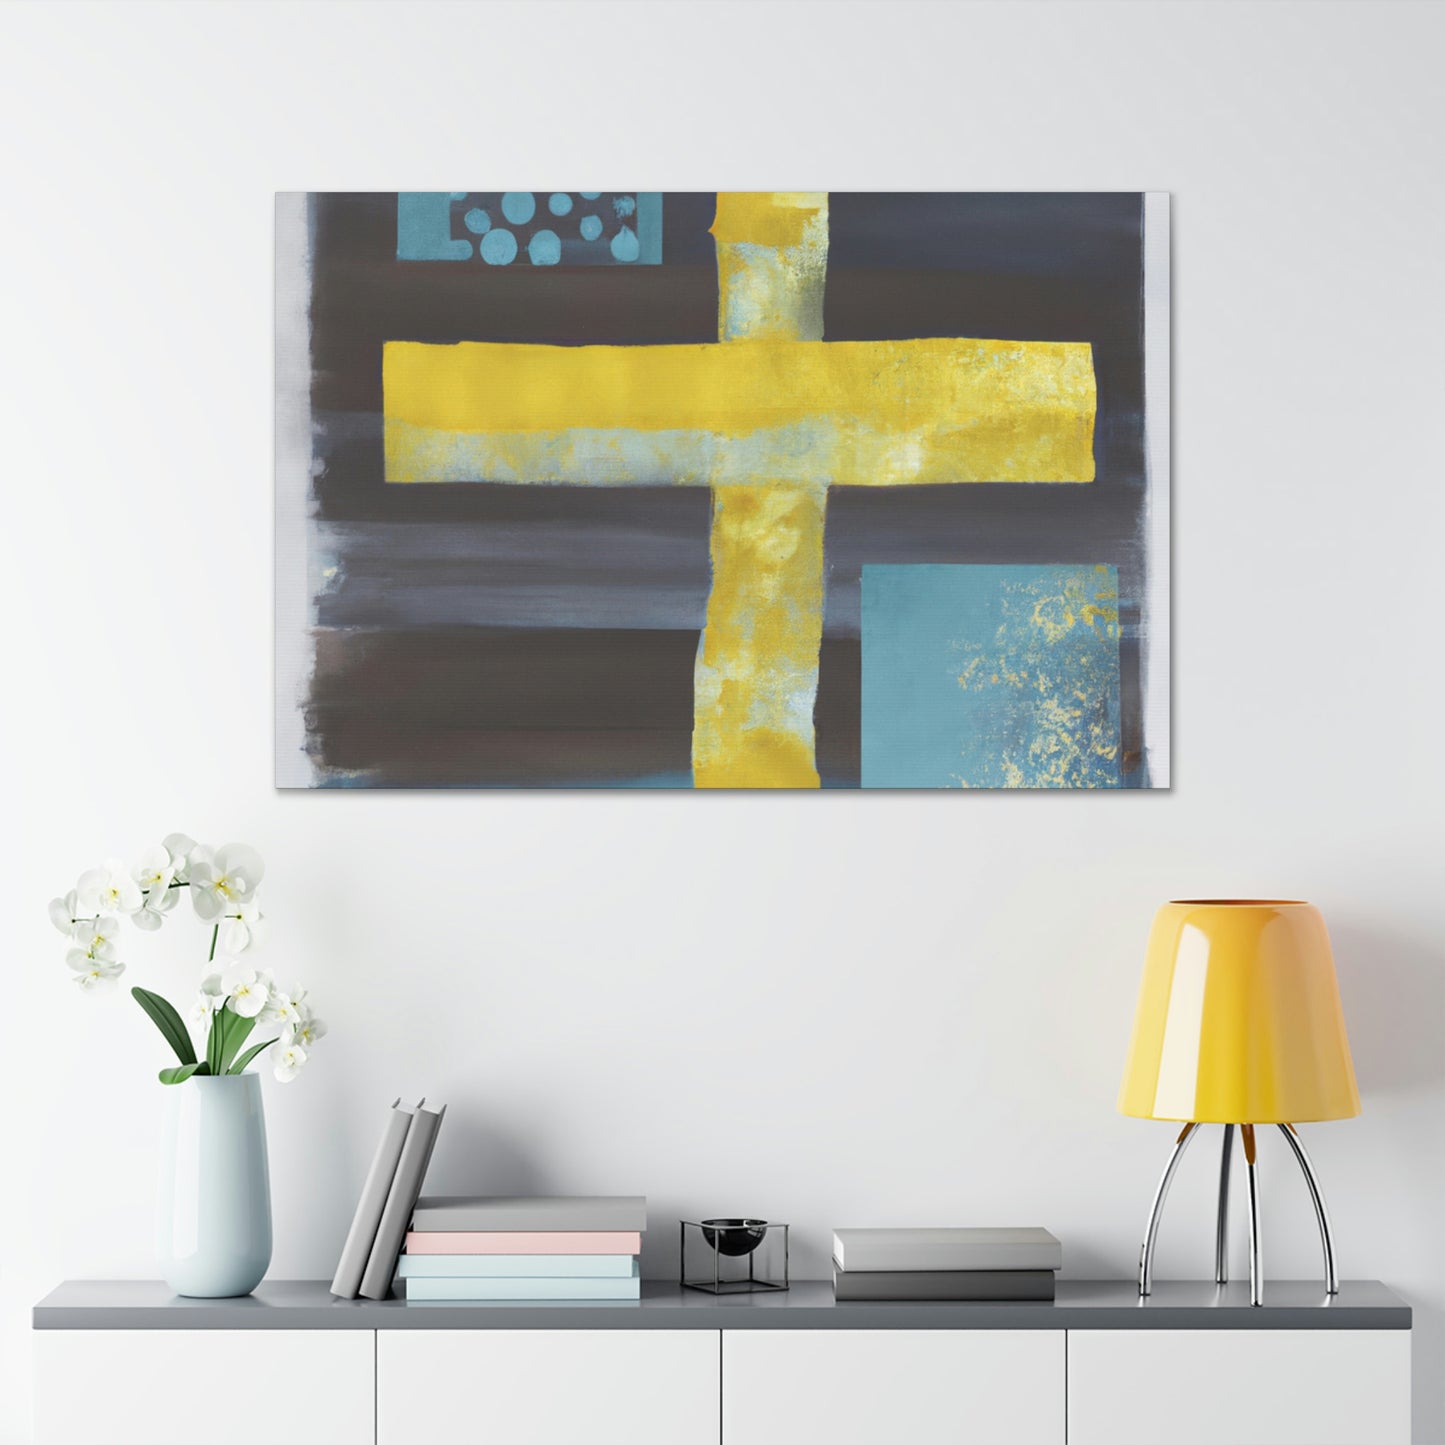 .

Philippians 2:3 
"Do nothing out of selfish ambition or vain conceit. Rather, in humility value others above yourselves." - Canvas Wall Art